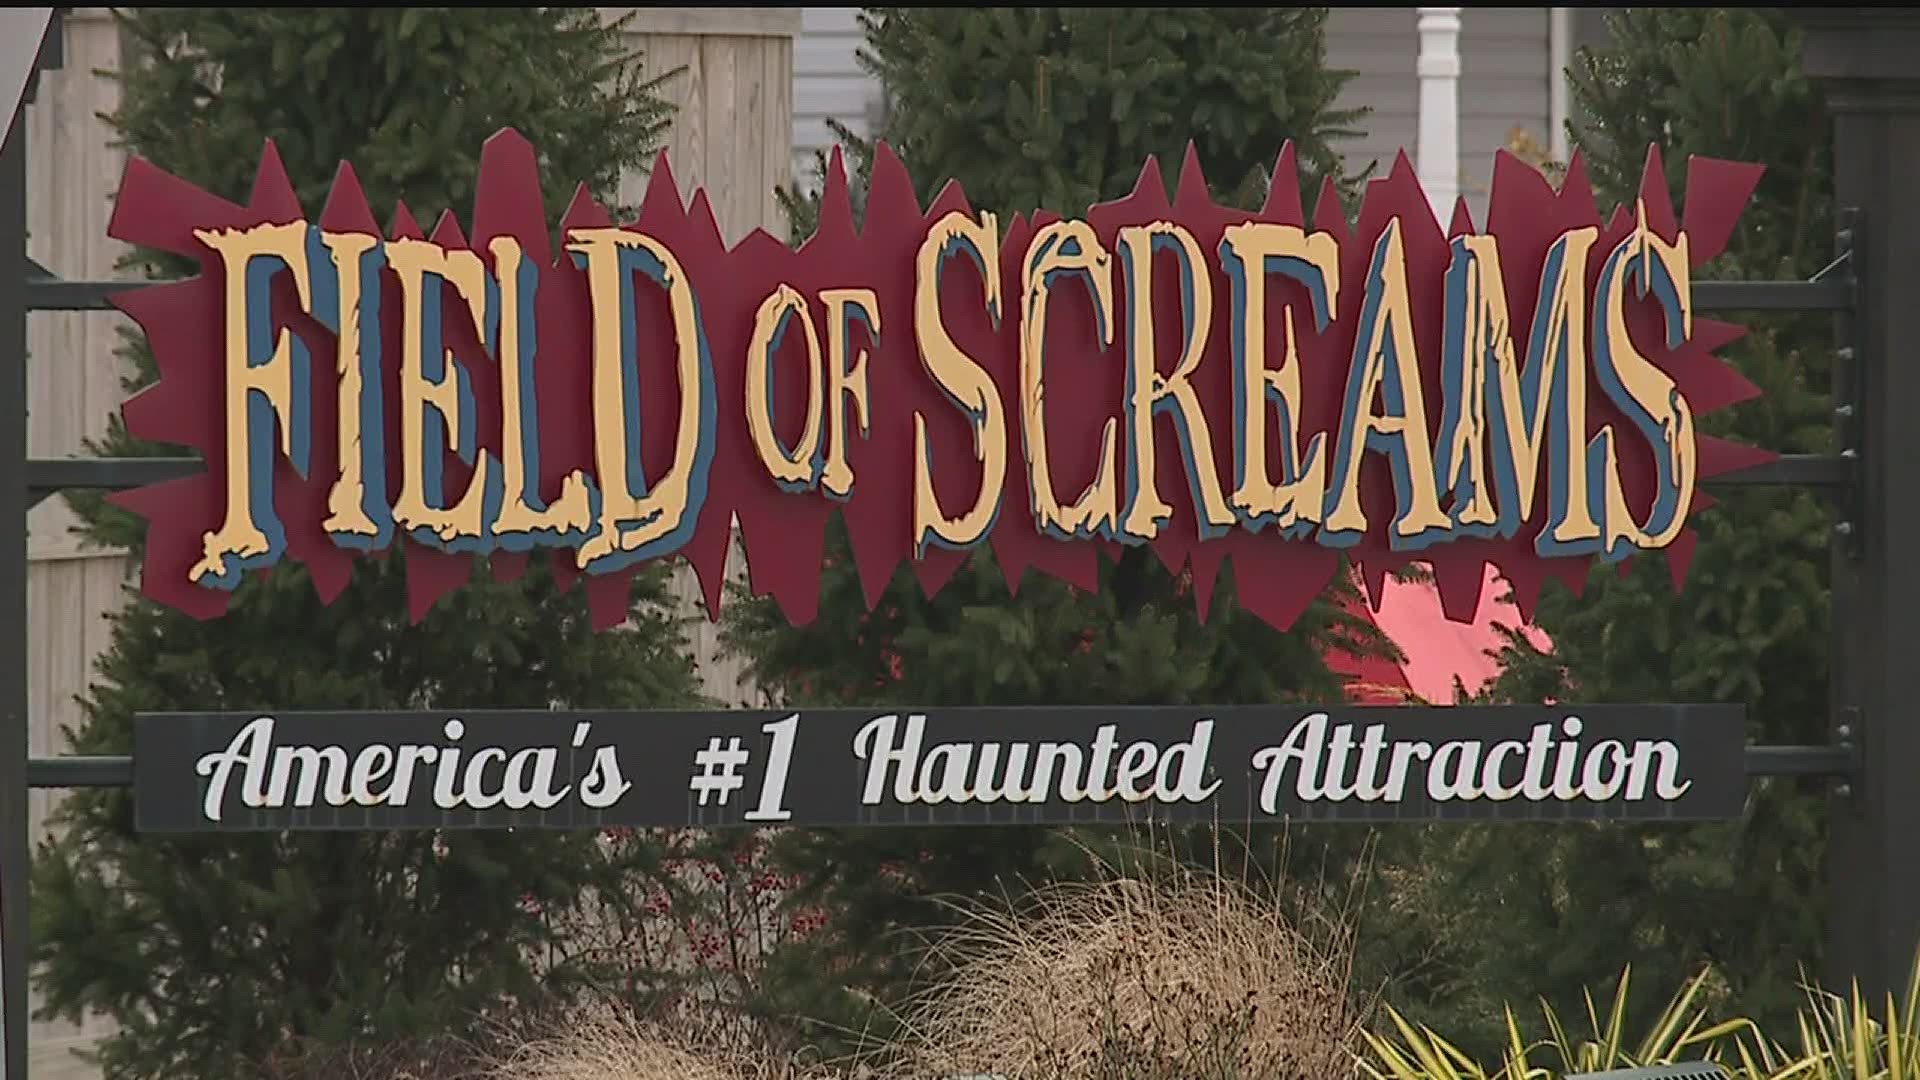 As Field of Screams Haunted Attraction prepares to open for Valentine's Day weekend, some of its actors say they won't be returning to scare willing customers.